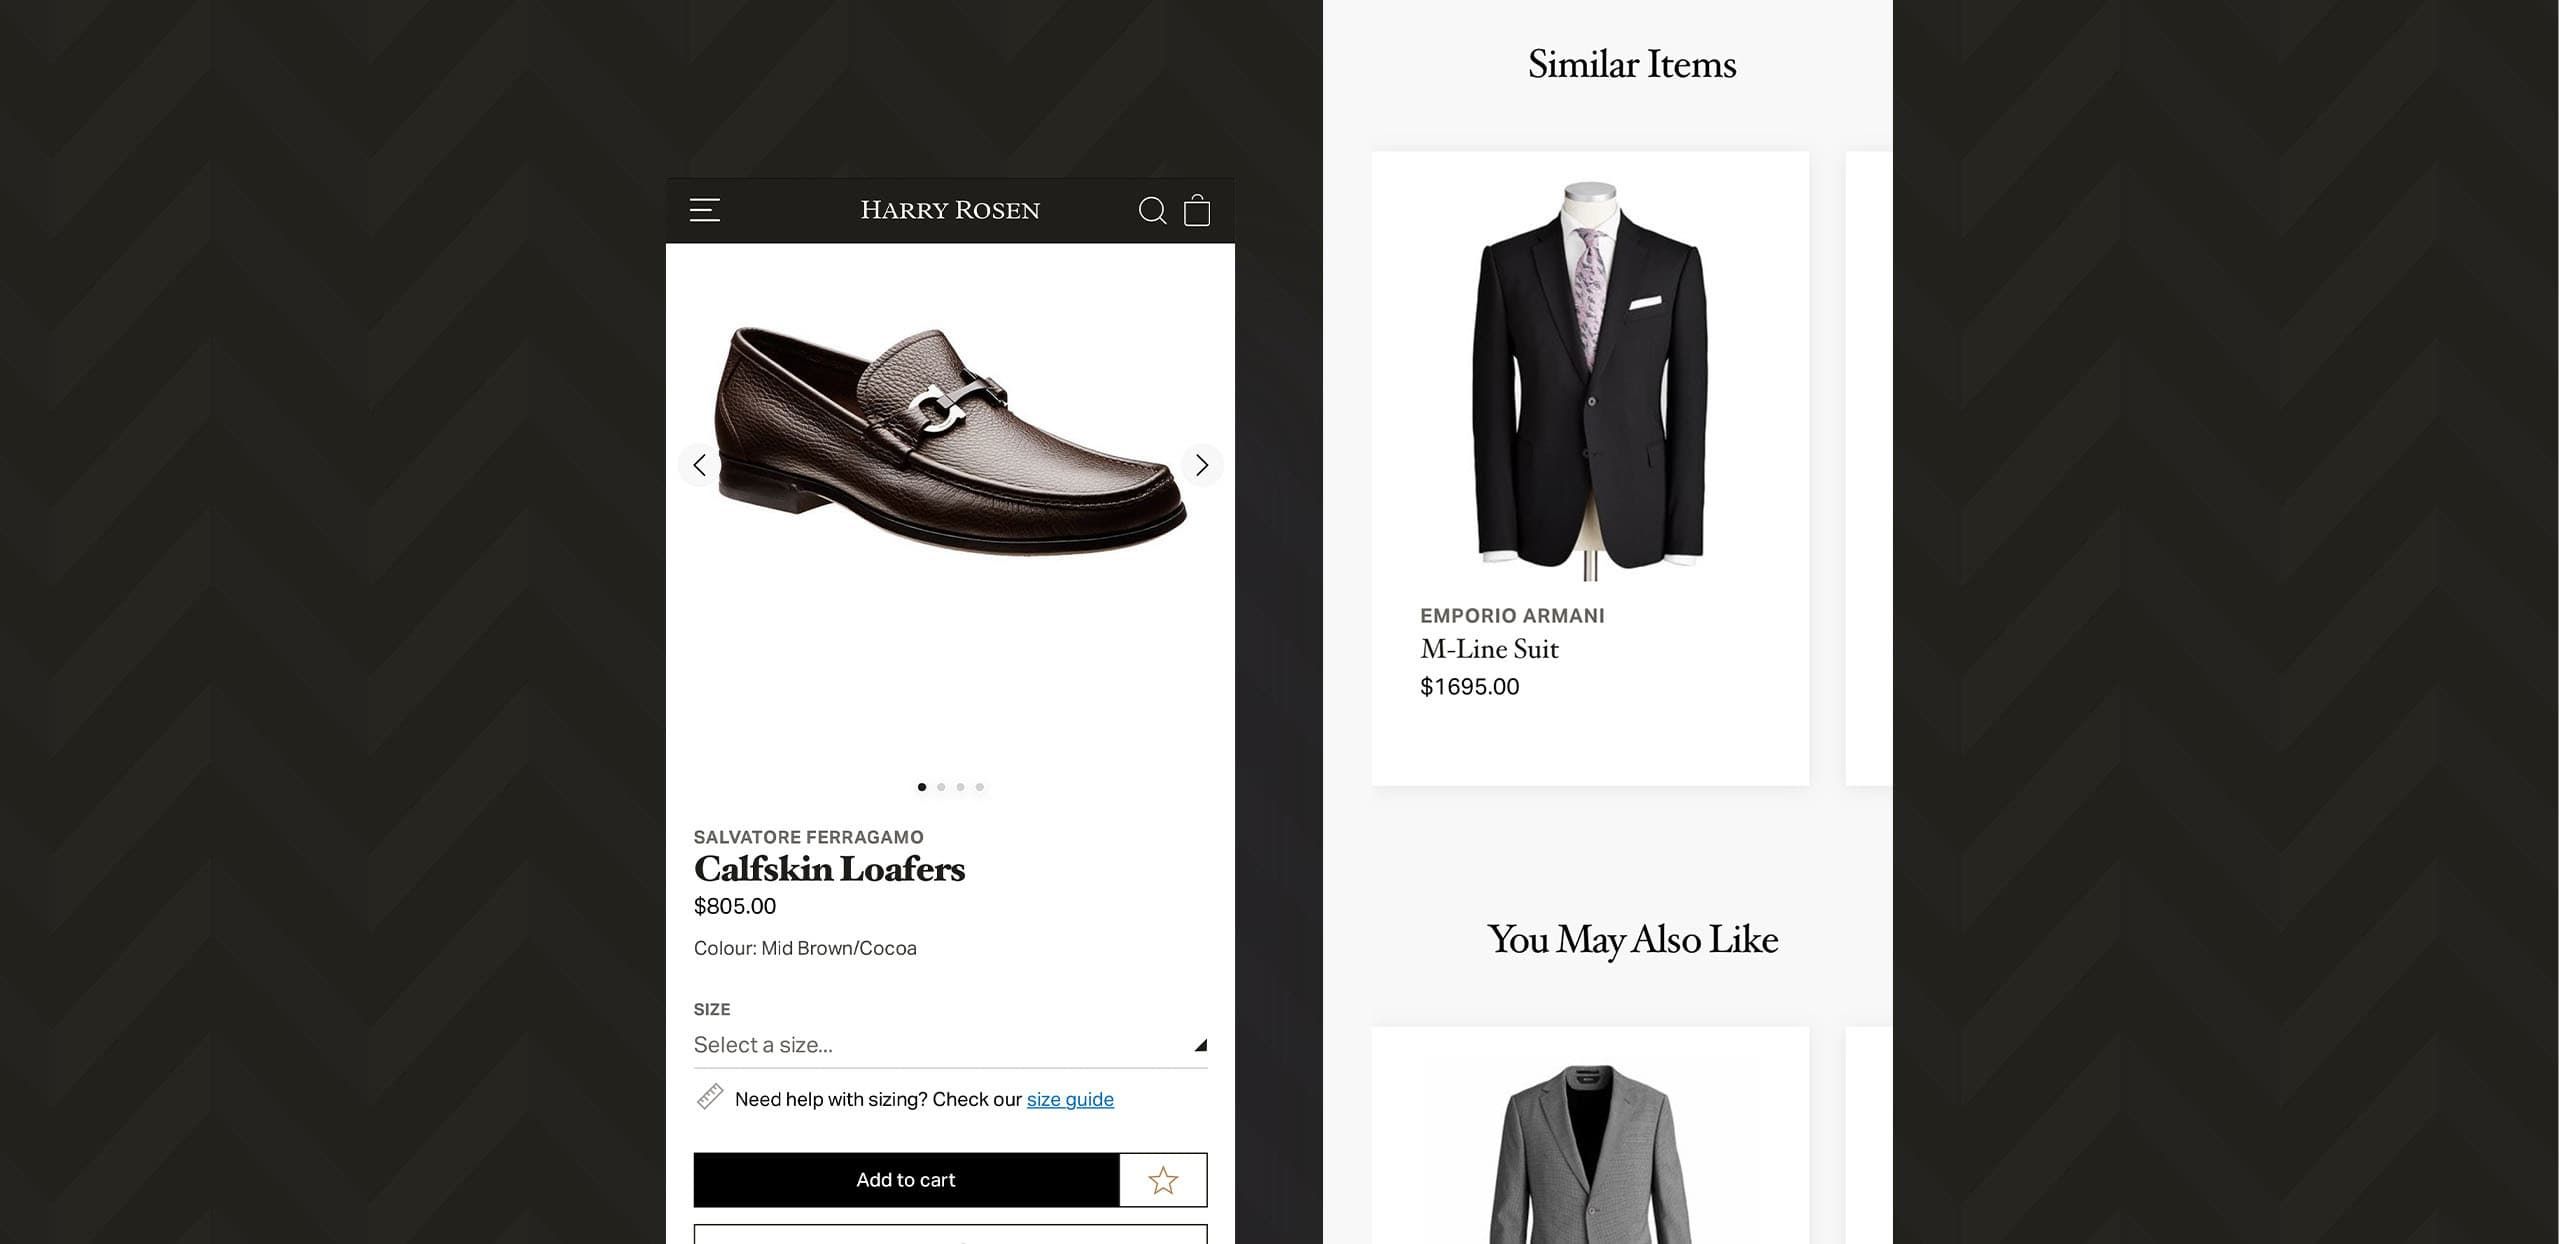 Screenshot of Harry Rosen products with suggested styles that will work well together.